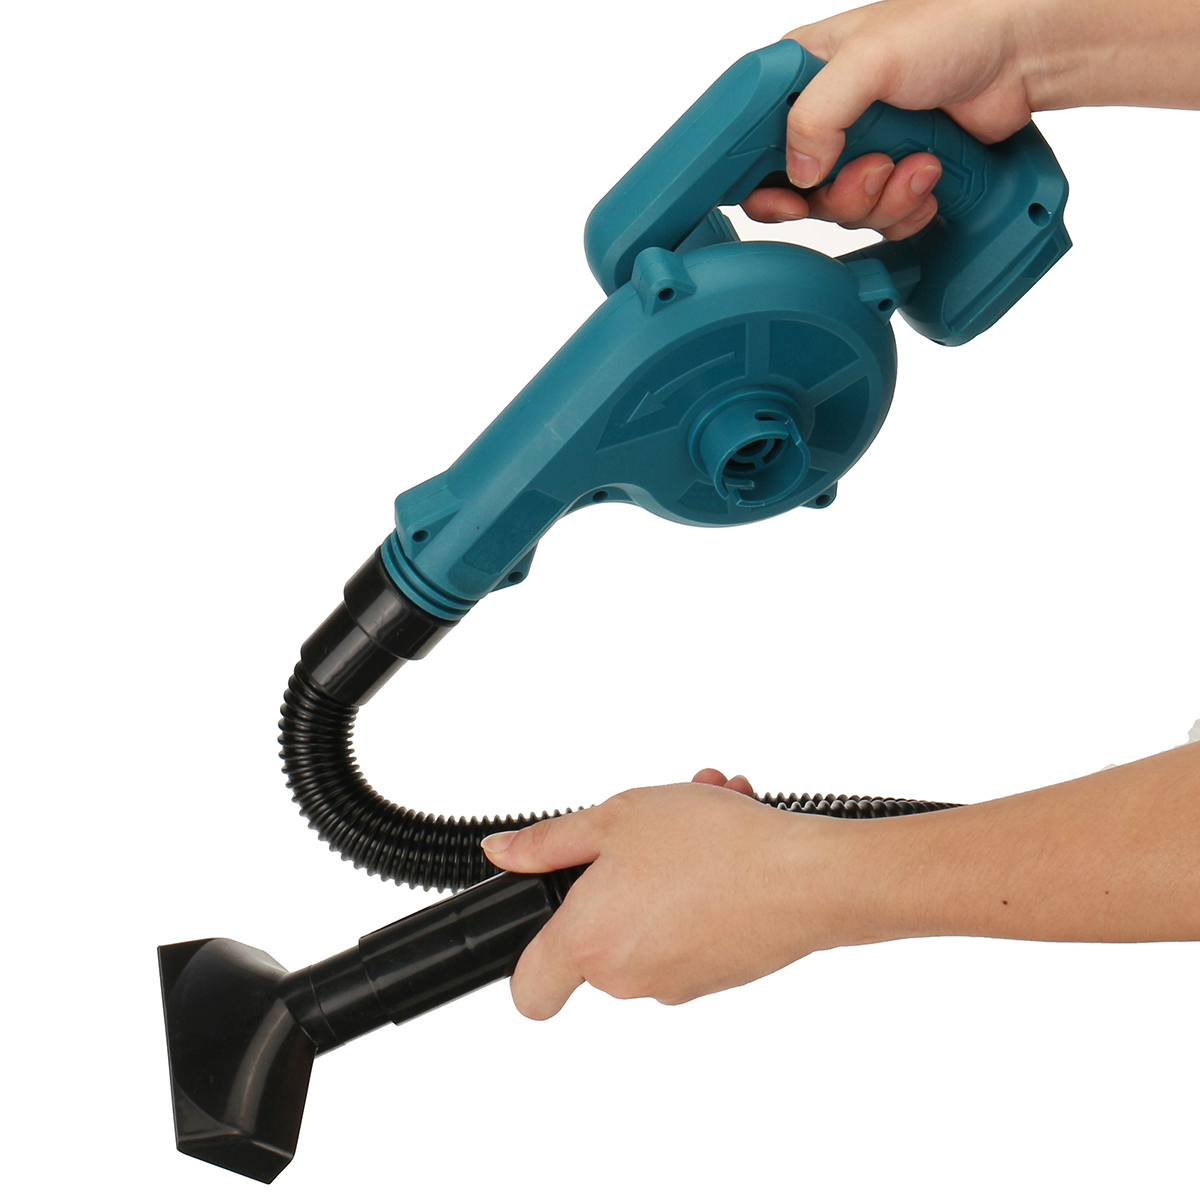 2-in-1-Electric-Air-Blower-Vacuum-Cleaner-Handheld-Dust-Collecting-Tool-For-Makita-18V-Battery-1771460-8